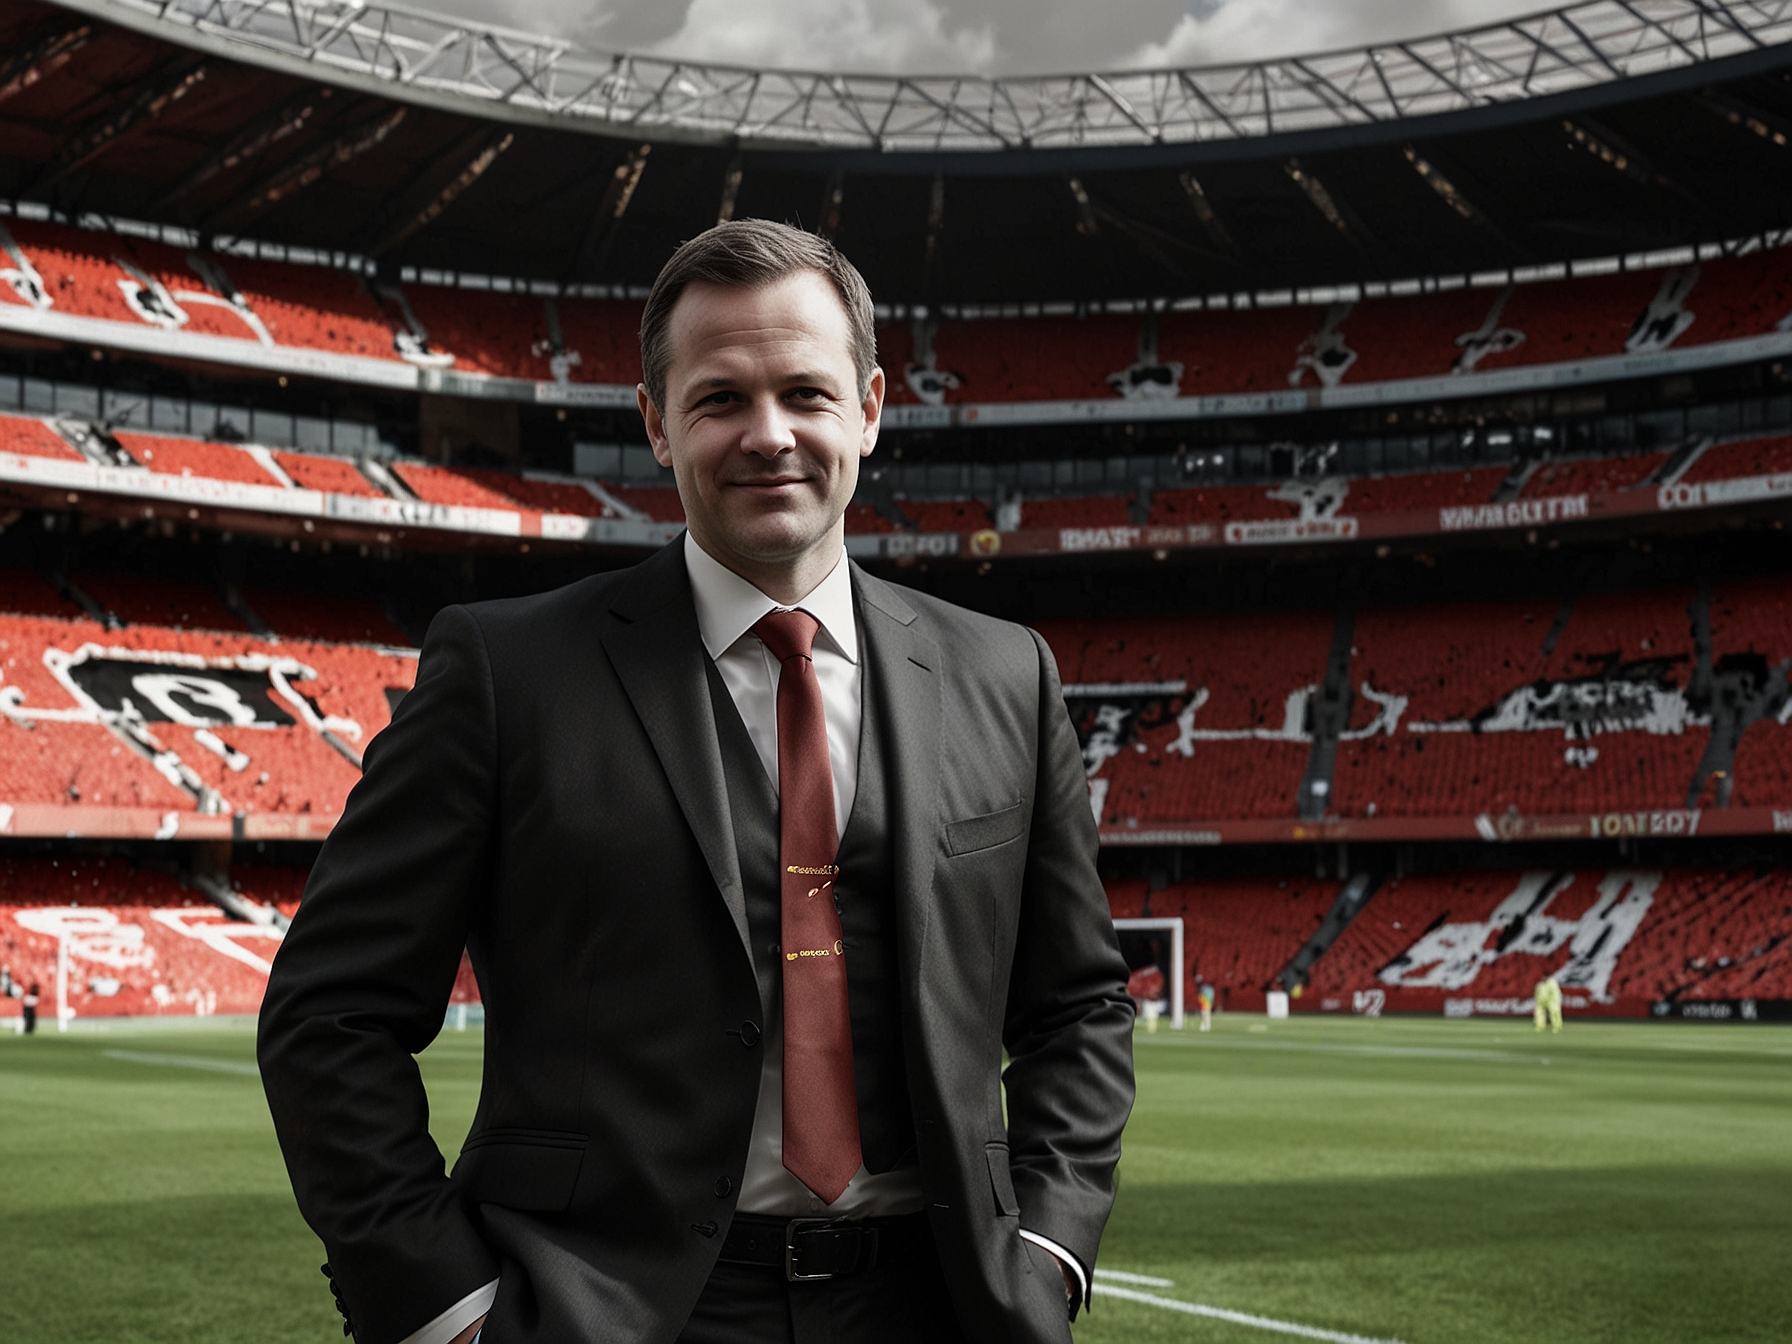 Dan Ashworth is warmly welcomed at Old Trafford after his appointment as Manchester United's new Sporting Director, marking a fresh strategic direction for the club.